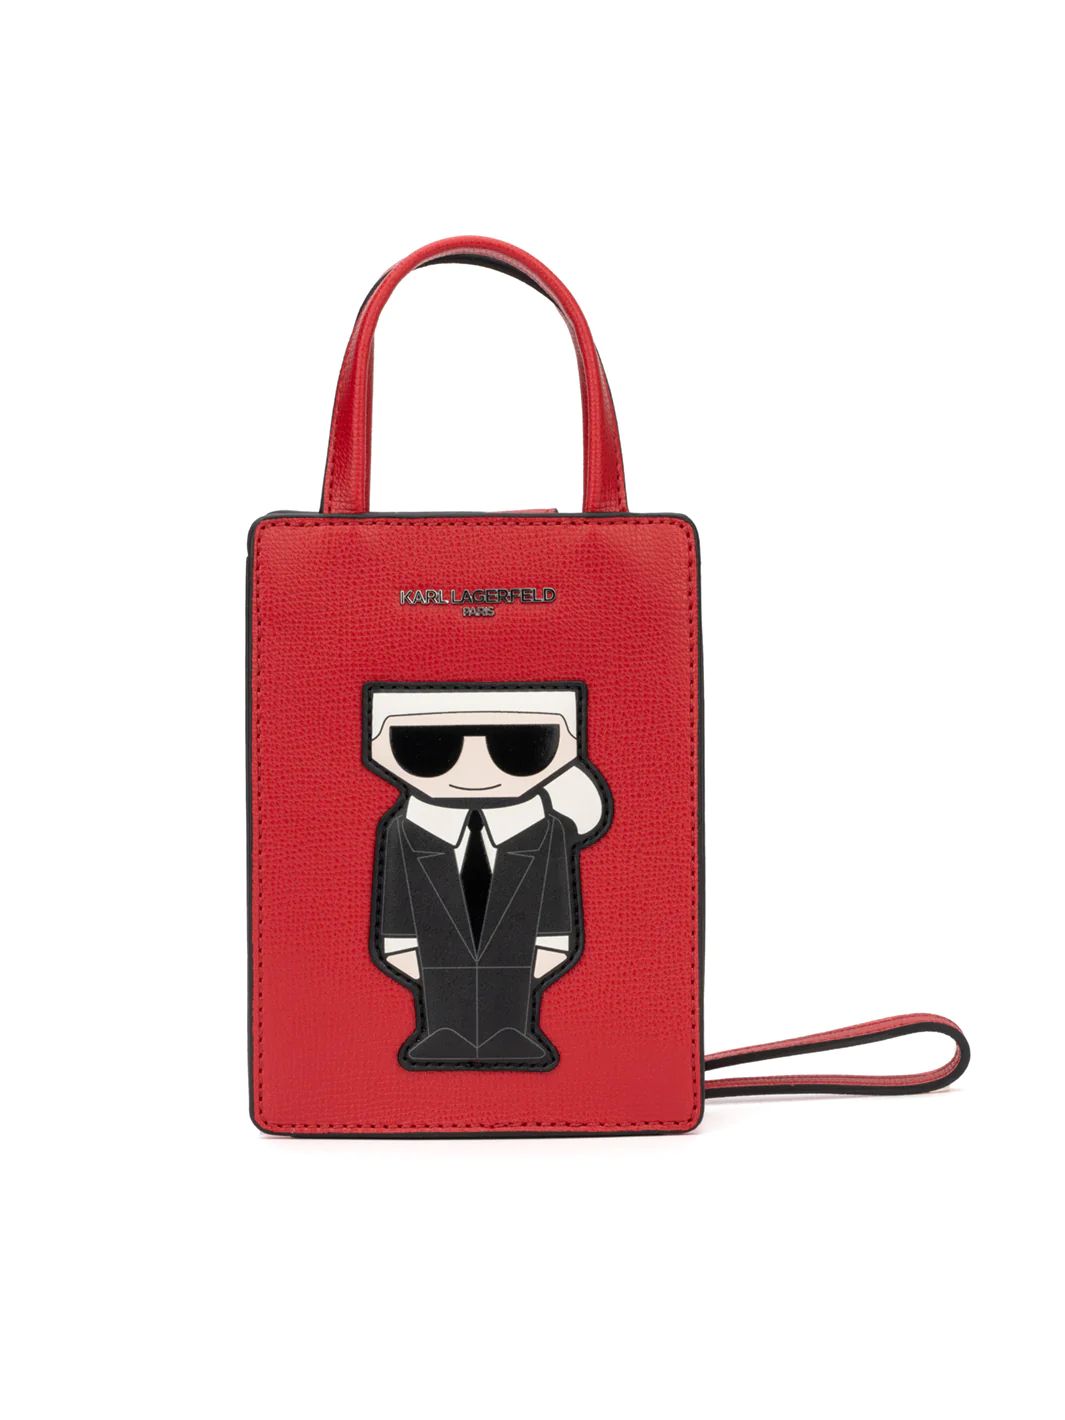 Karl Lagerfeld Paris Karl Character Tote Satchel in Crimson Lord & Taylor | Lord & Taylor